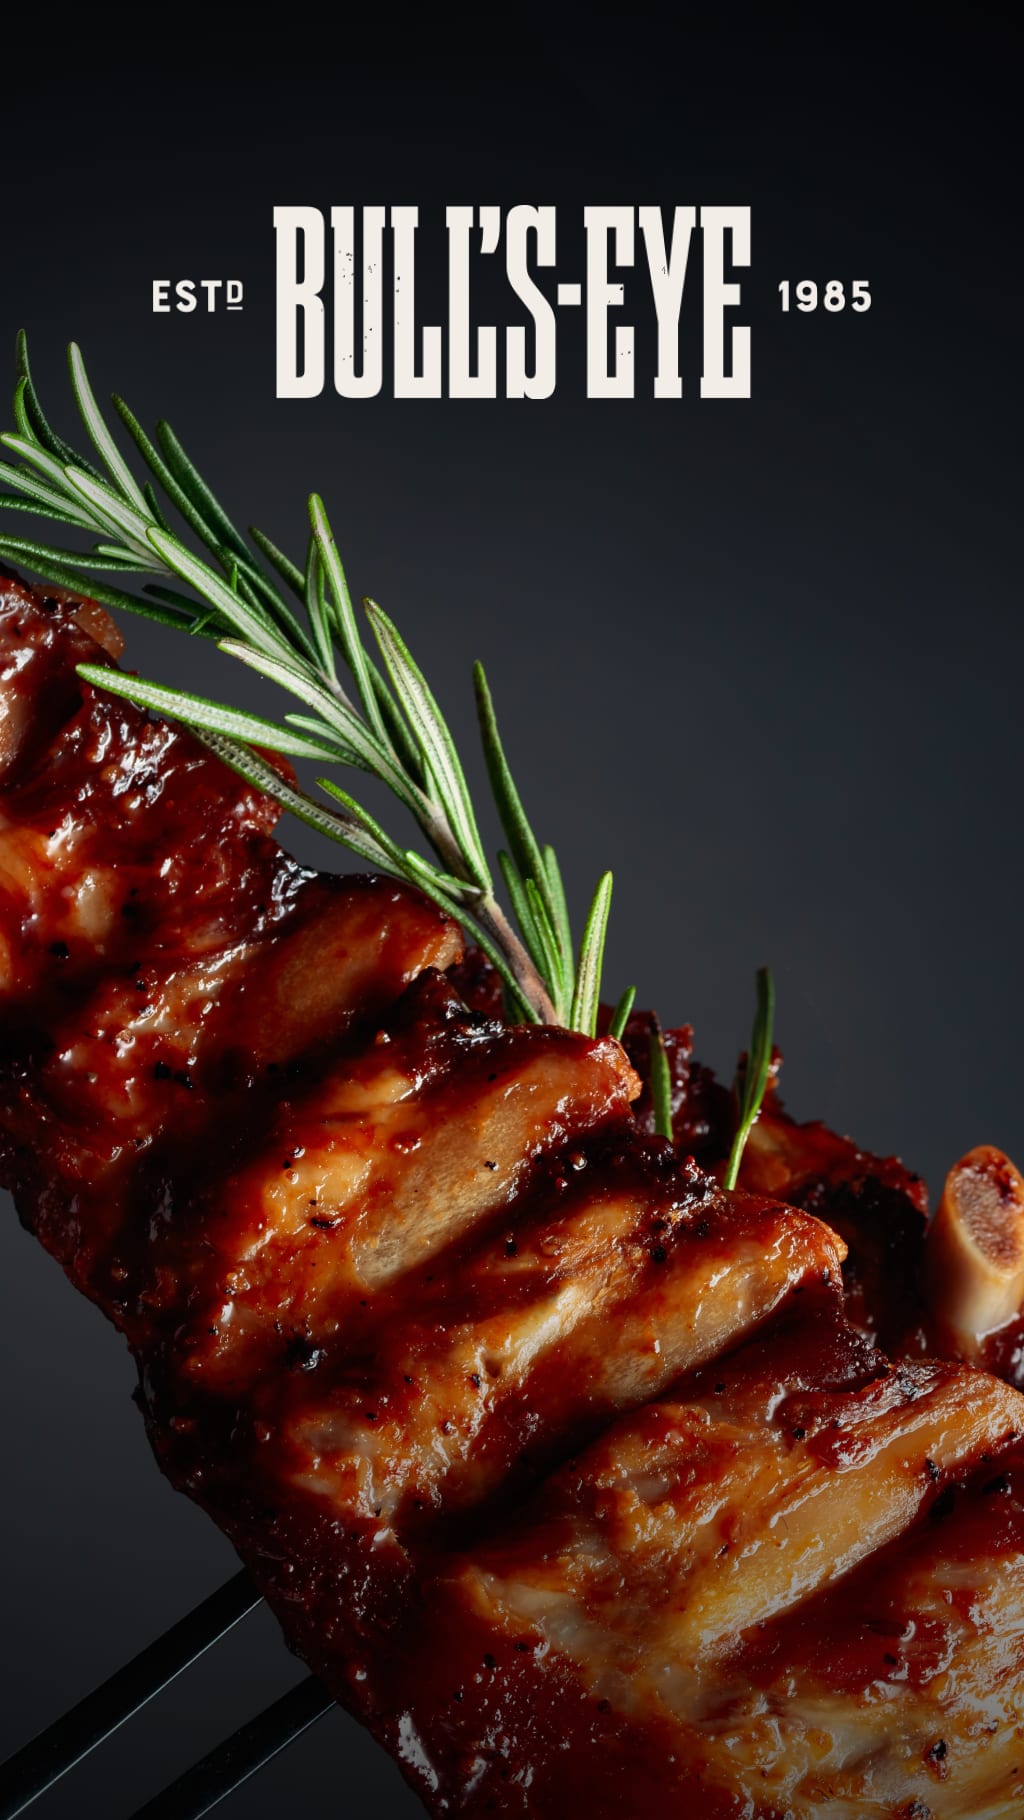 A rack of ribs on a BBQ fork, slathered in BBQ sauce and garnished with rosemary.